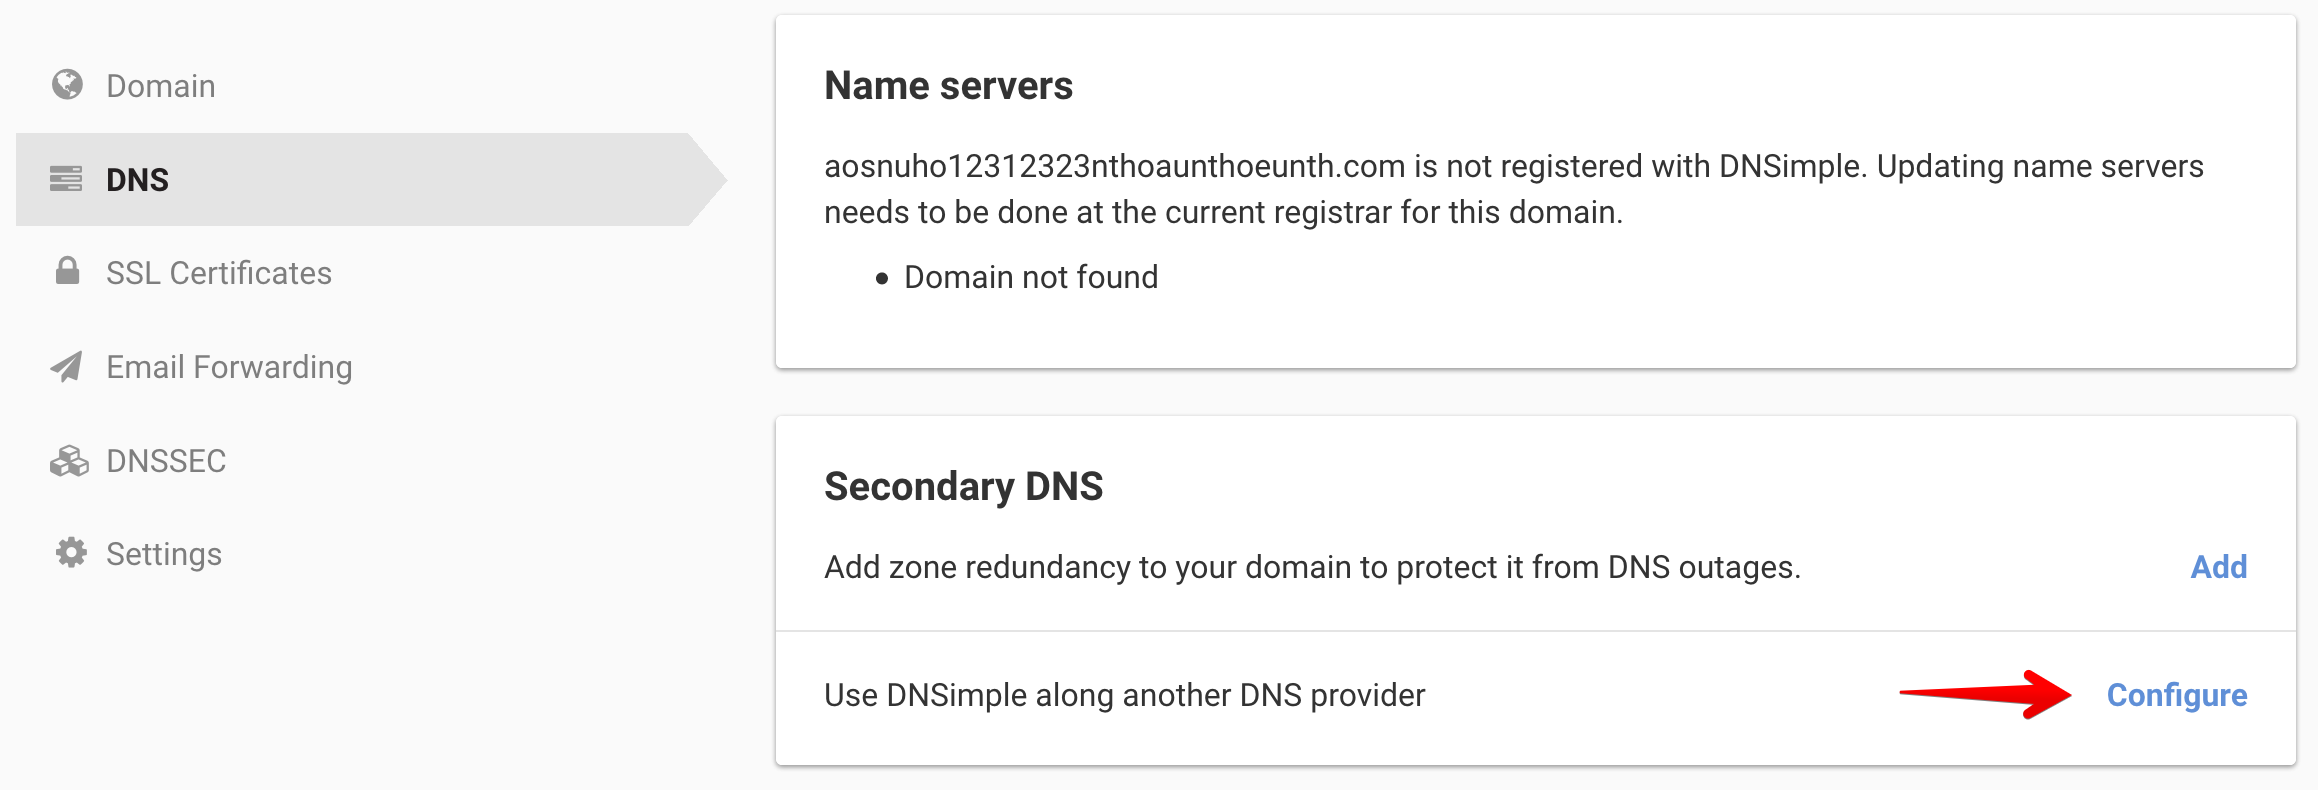 WHOIS Privacy Protection - DNSimple Help